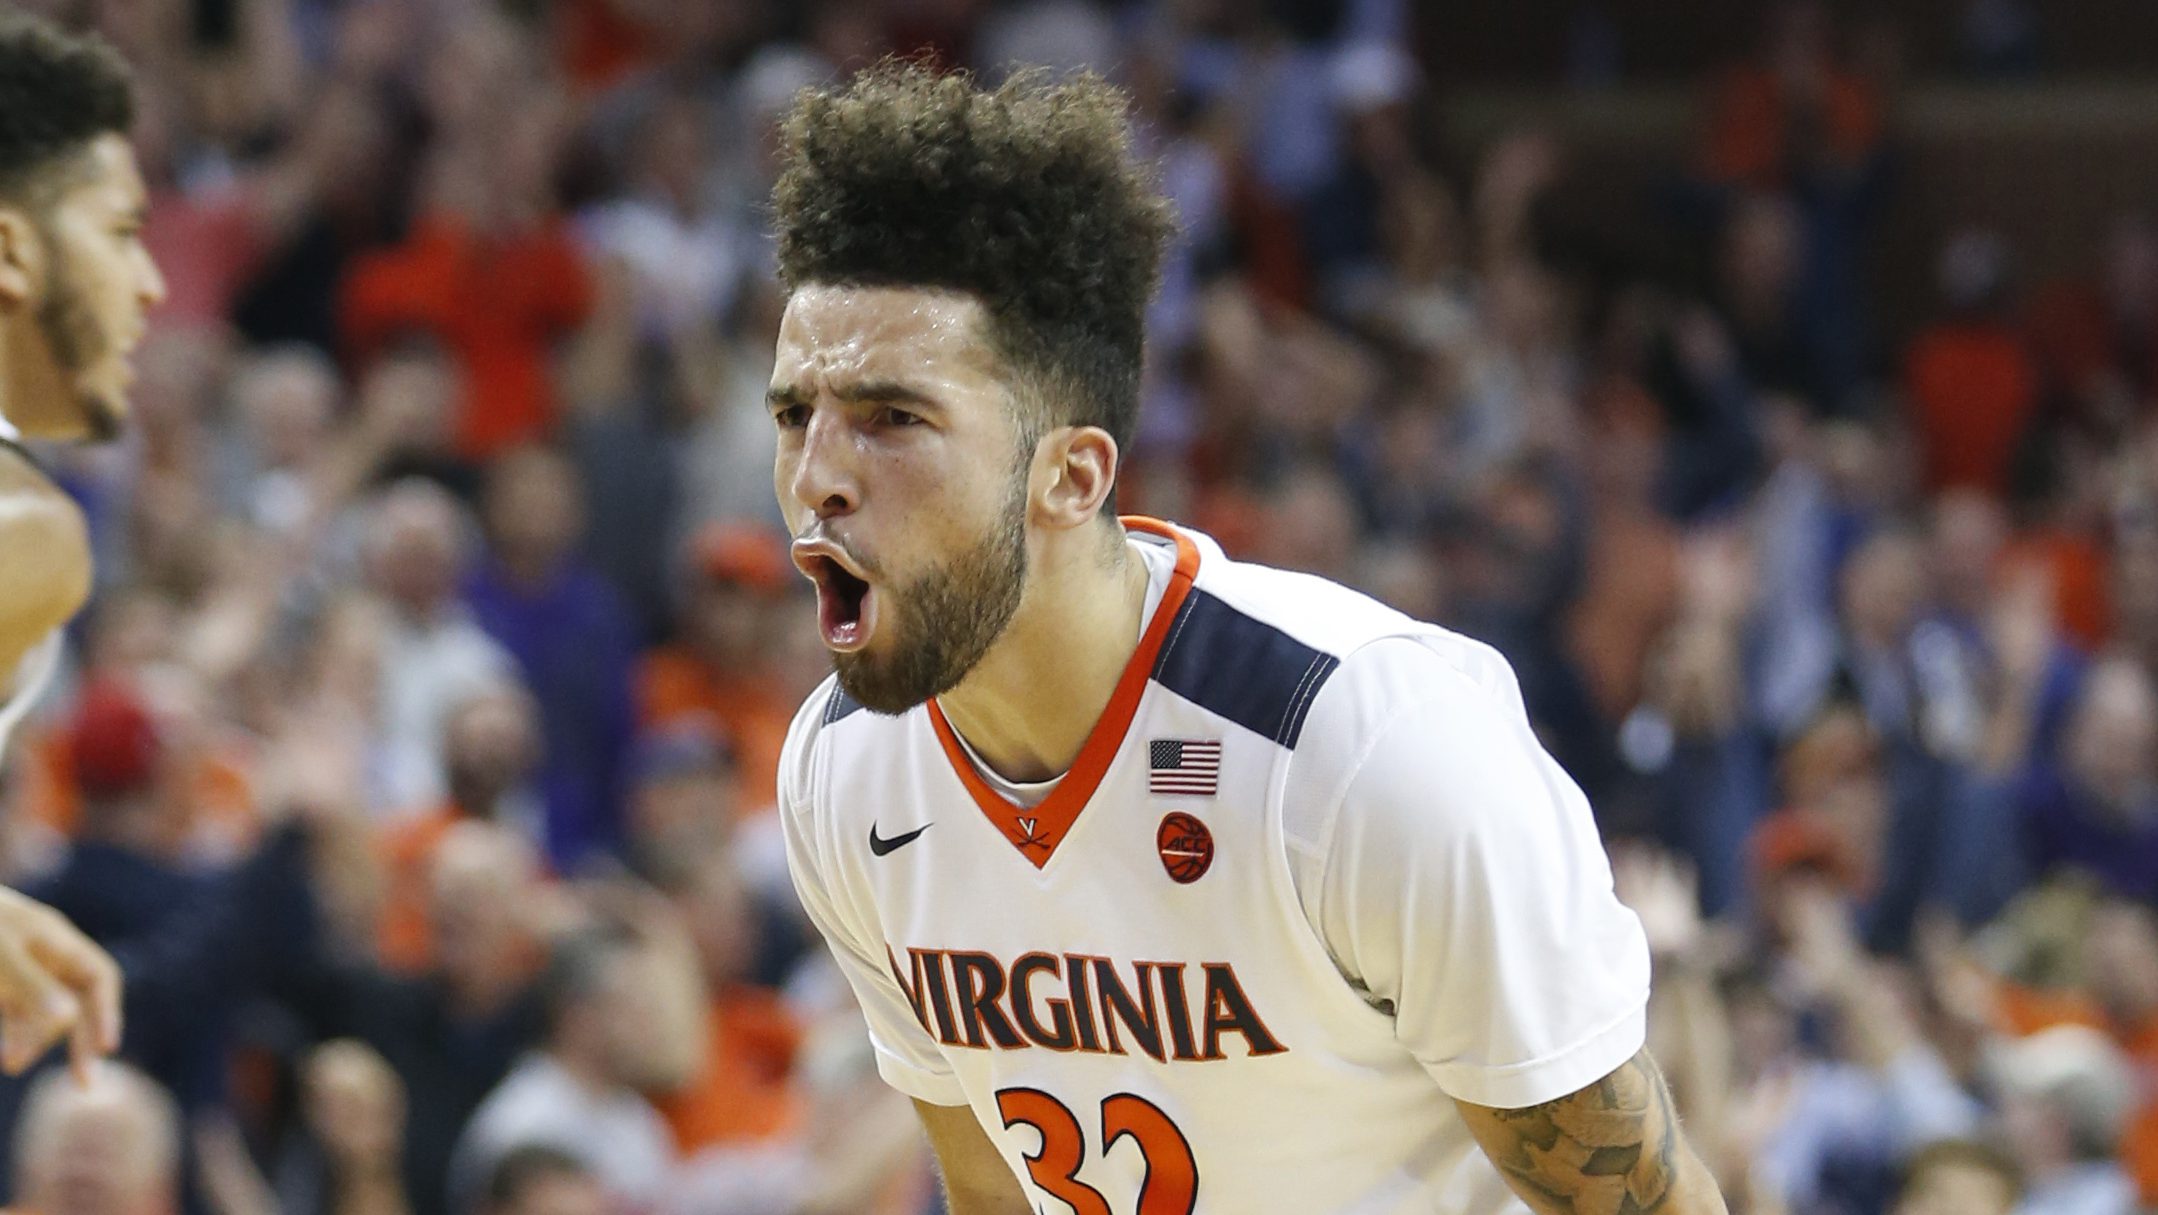 Virginia guard London Perrantes (32) reacts to a three pointer during the second half of an NCAA college basketball game in Charlottesville, Va., Wednesday, Nov. 30, 2016. Virginia won the game 63-61. (AP Photo/Steve Helber)